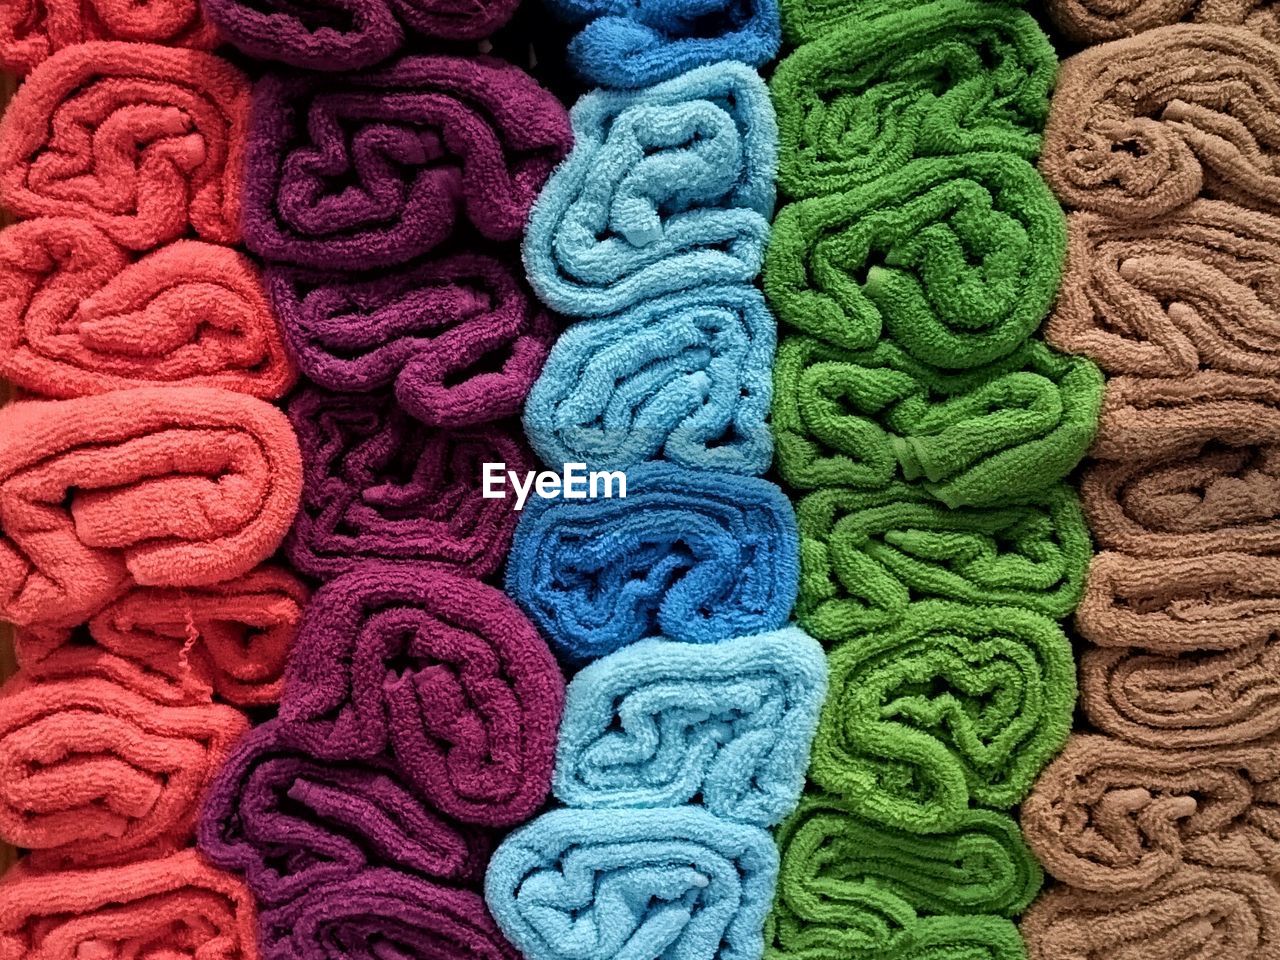 Full frame shot of colorful rolled towels